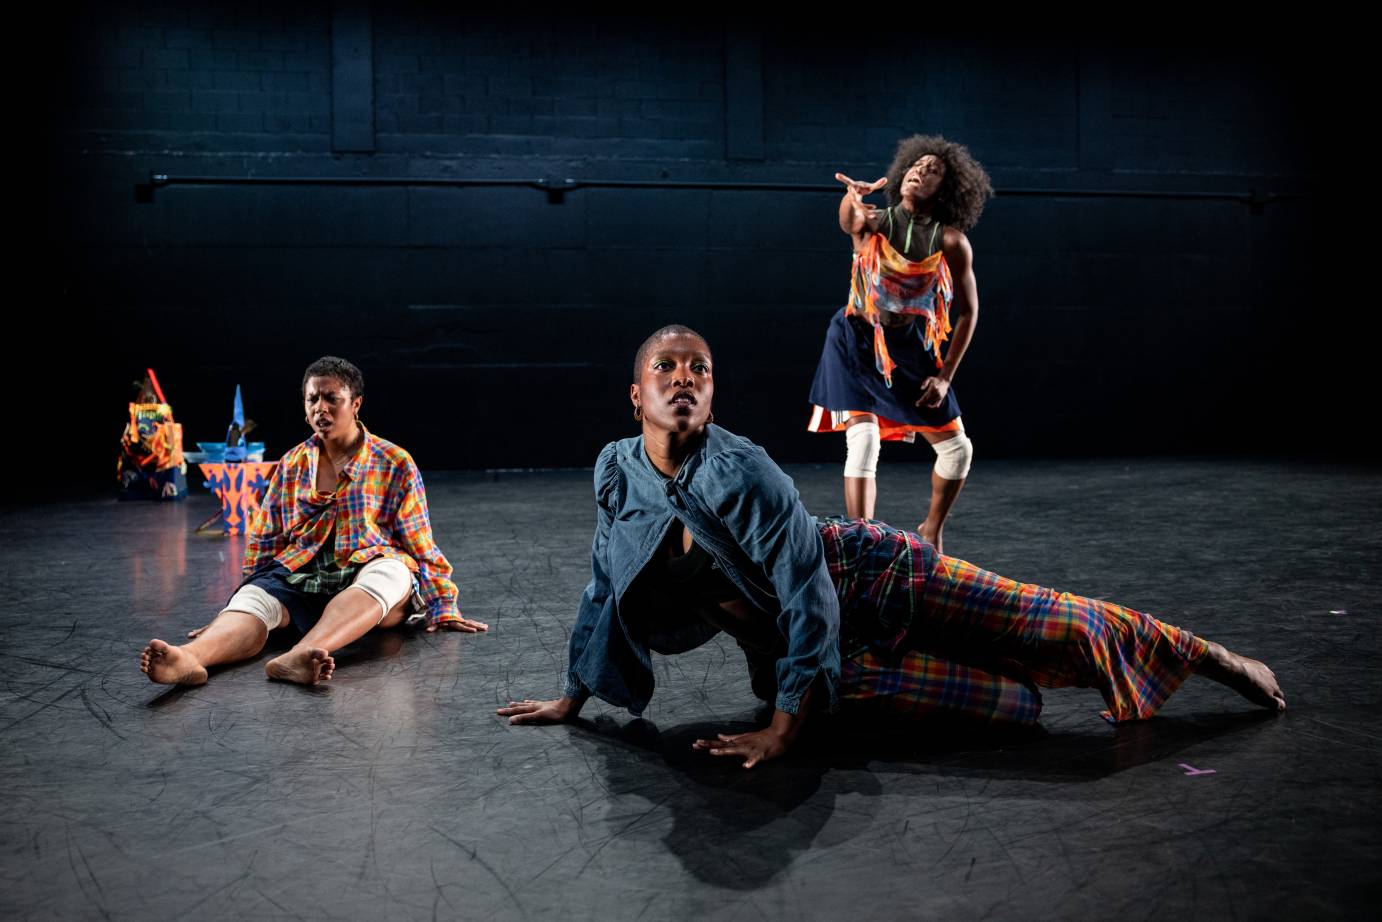 Three Black women form a triangle on stage. They are wearing colorful everyday clothes and each seems to be in their own world of communication... 